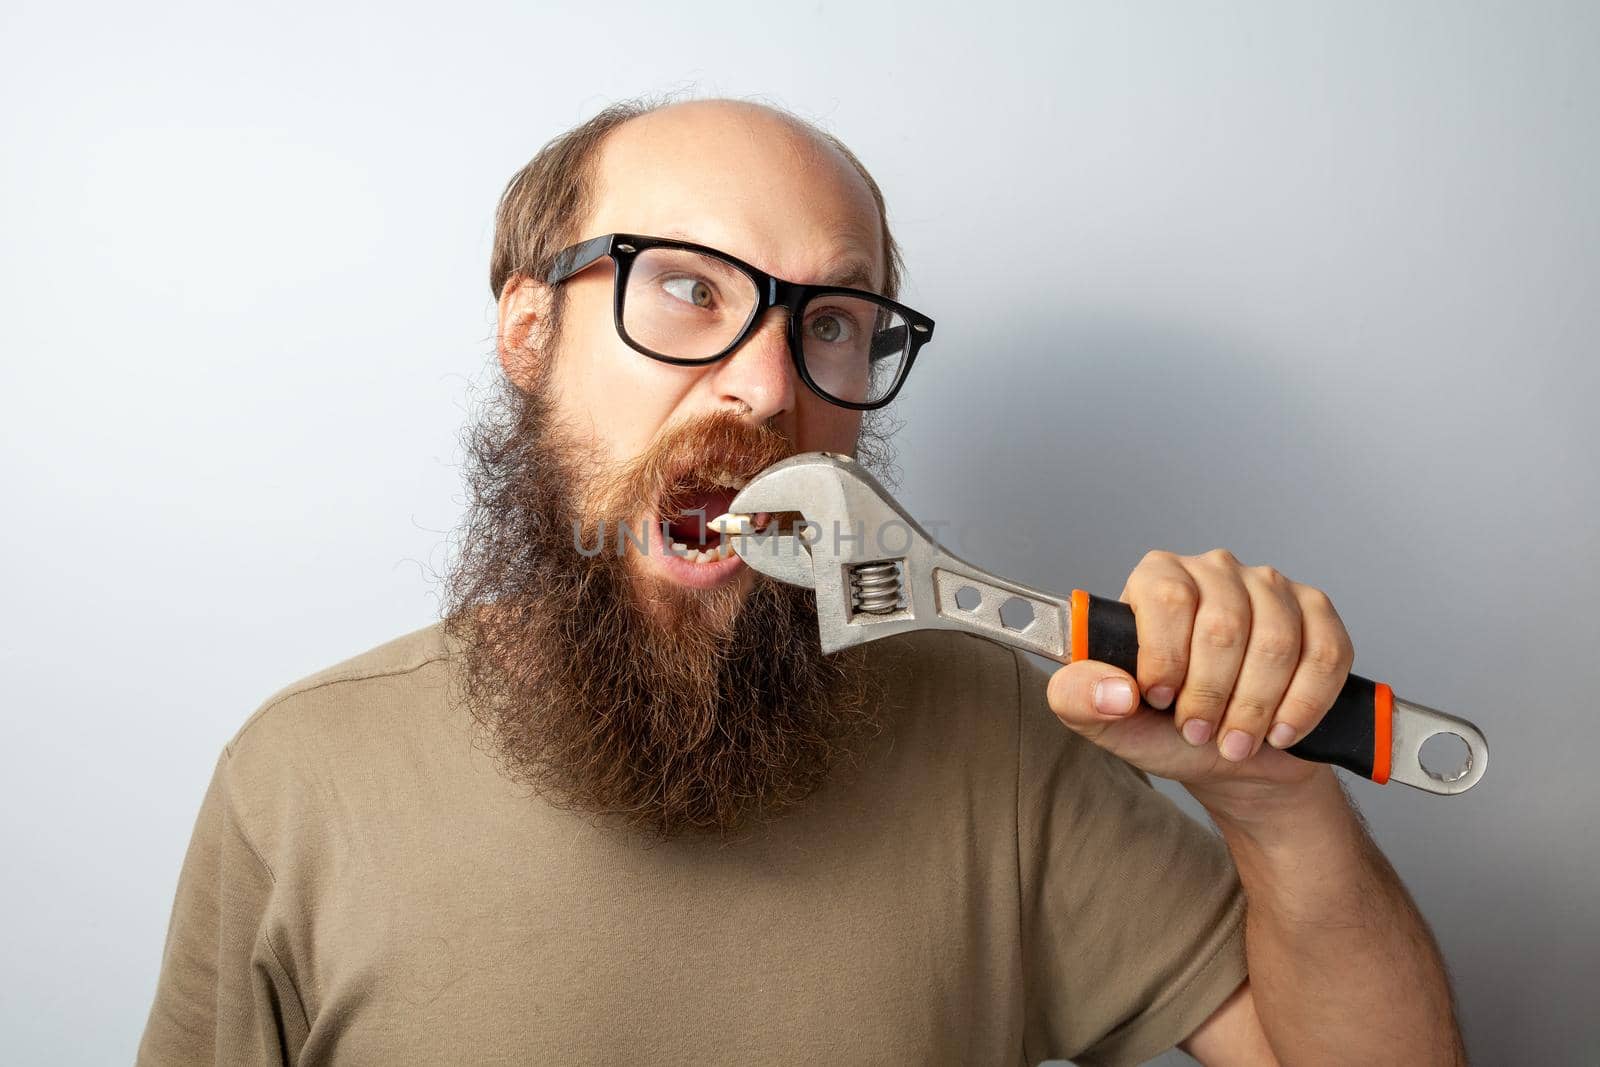 Funny male pulling out tooth with wrench, having foolish expression, looks away with crossed eyes, bald bearded man wearing T-shirt and glasses. Indoor studio shot isolated on gray background.